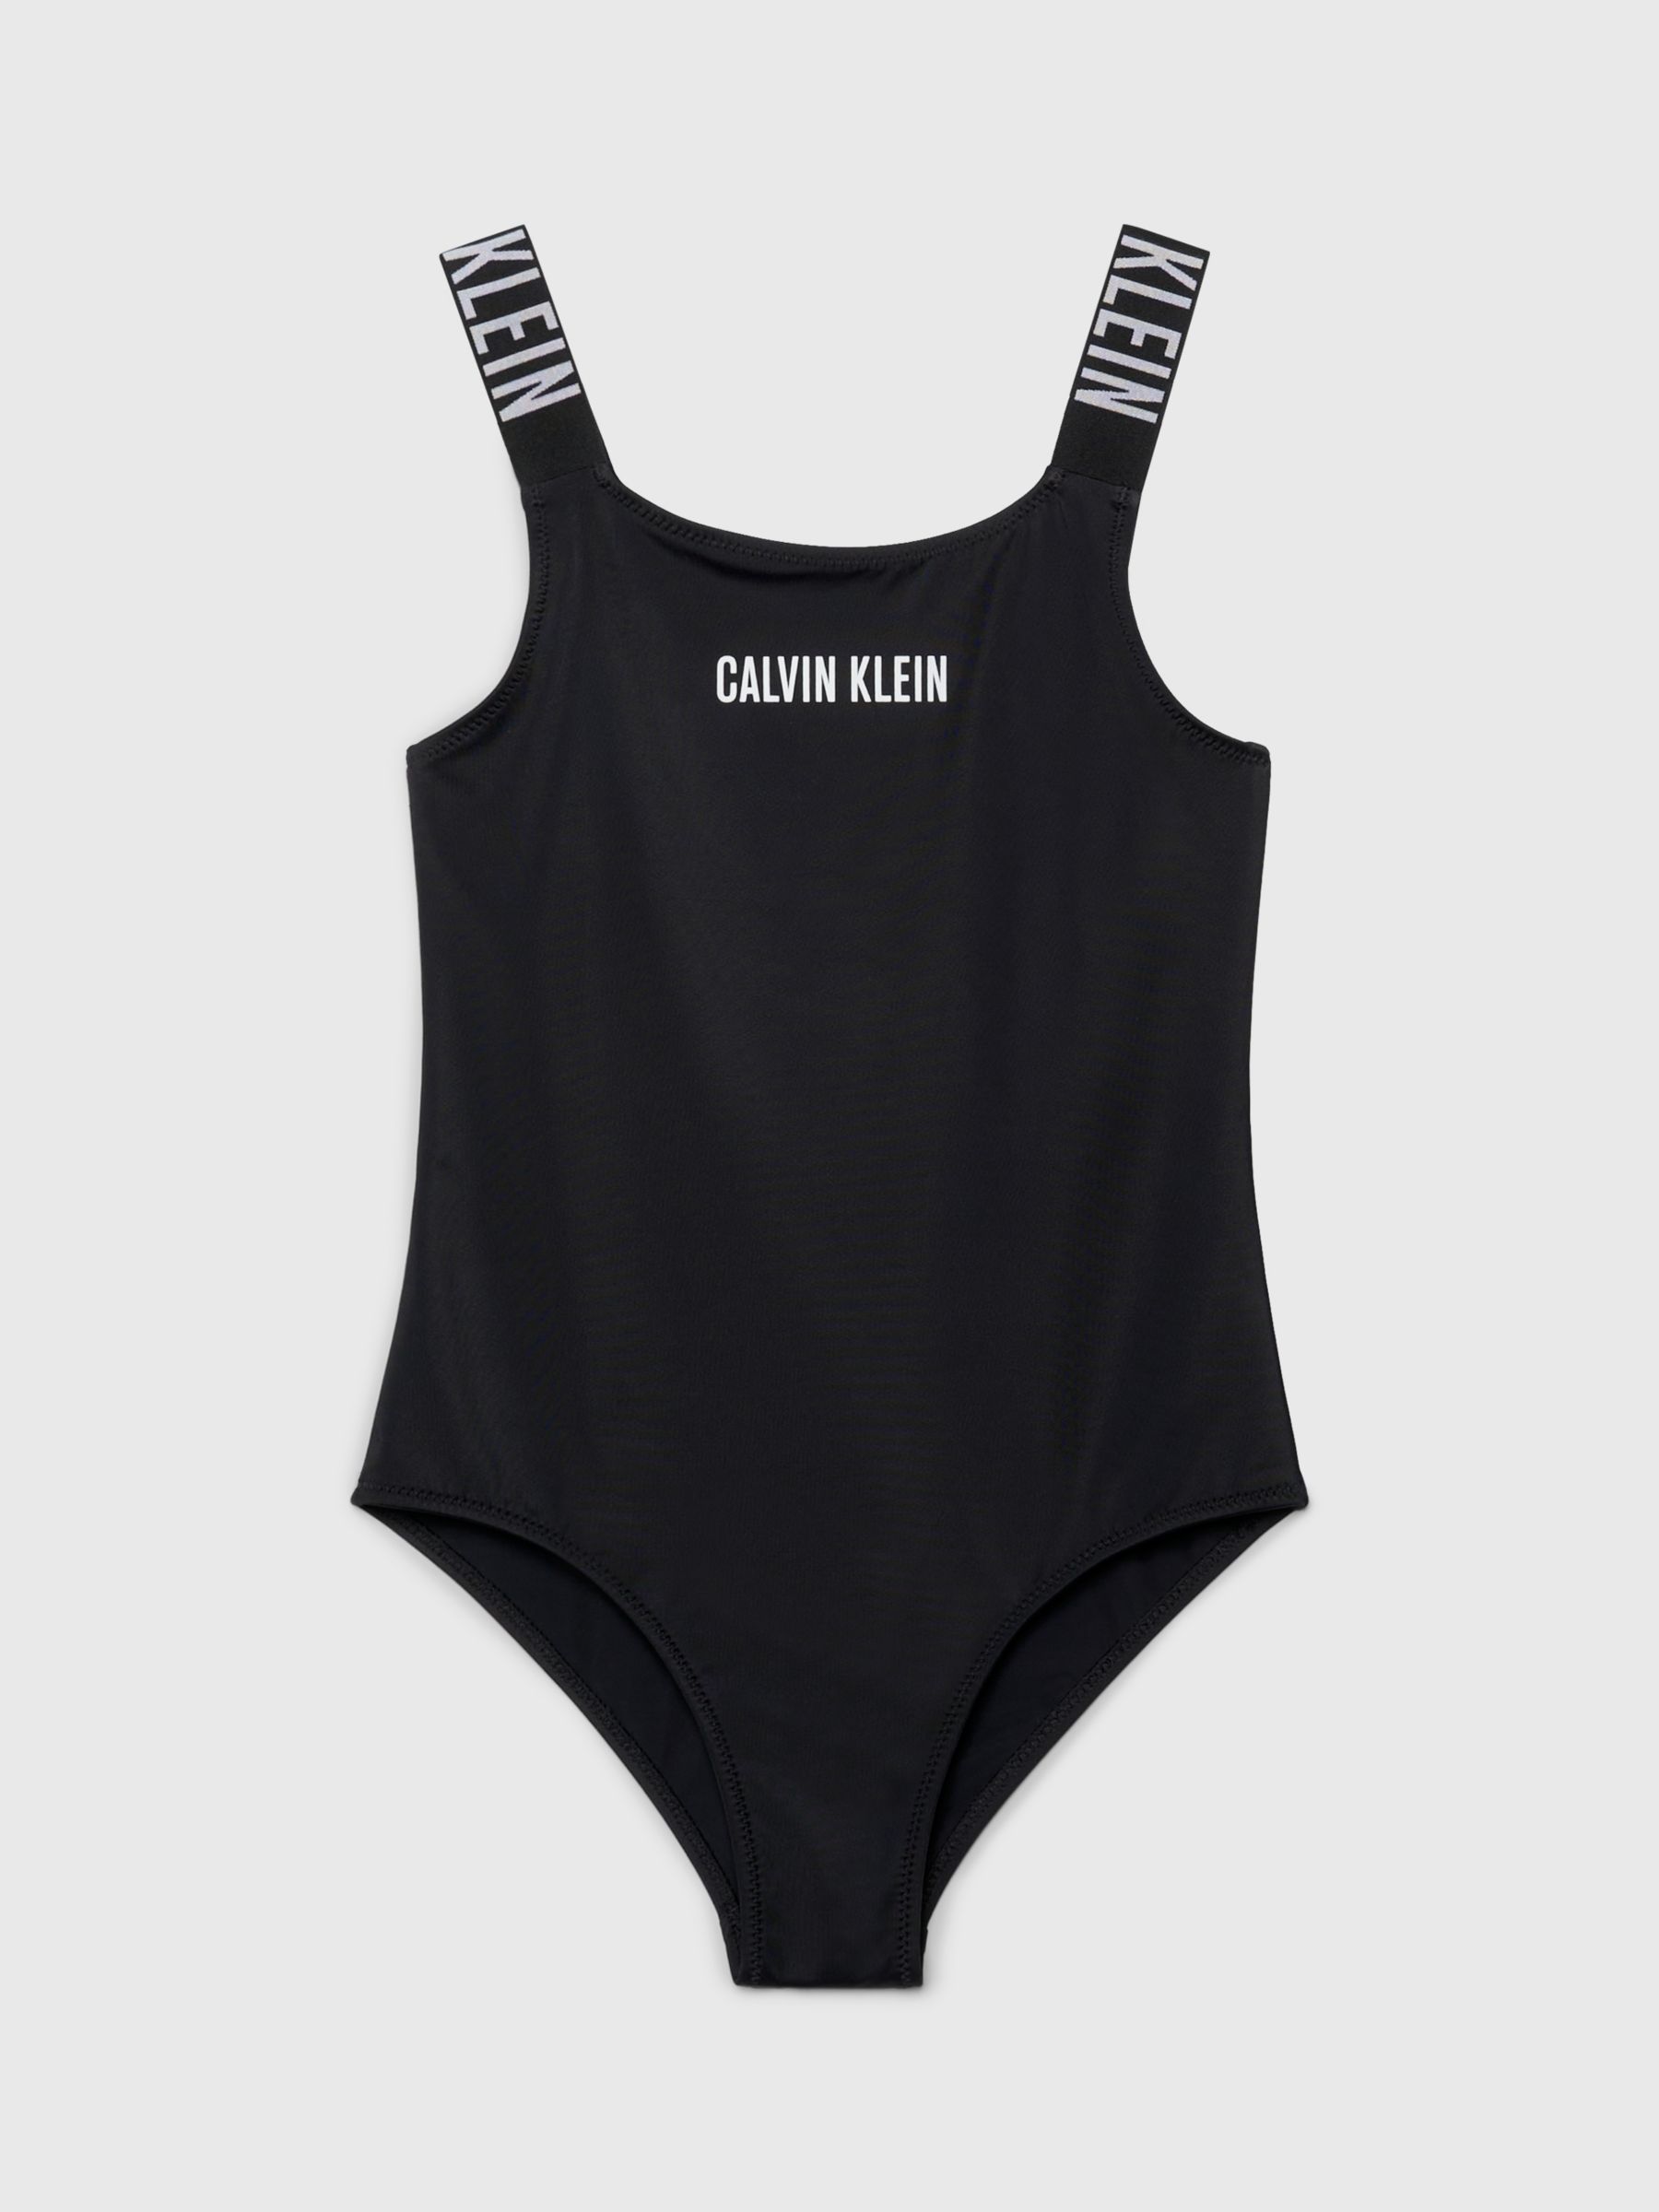 Calvin Klein Micro Belt Cut Out One Piece Swimsuit in Black